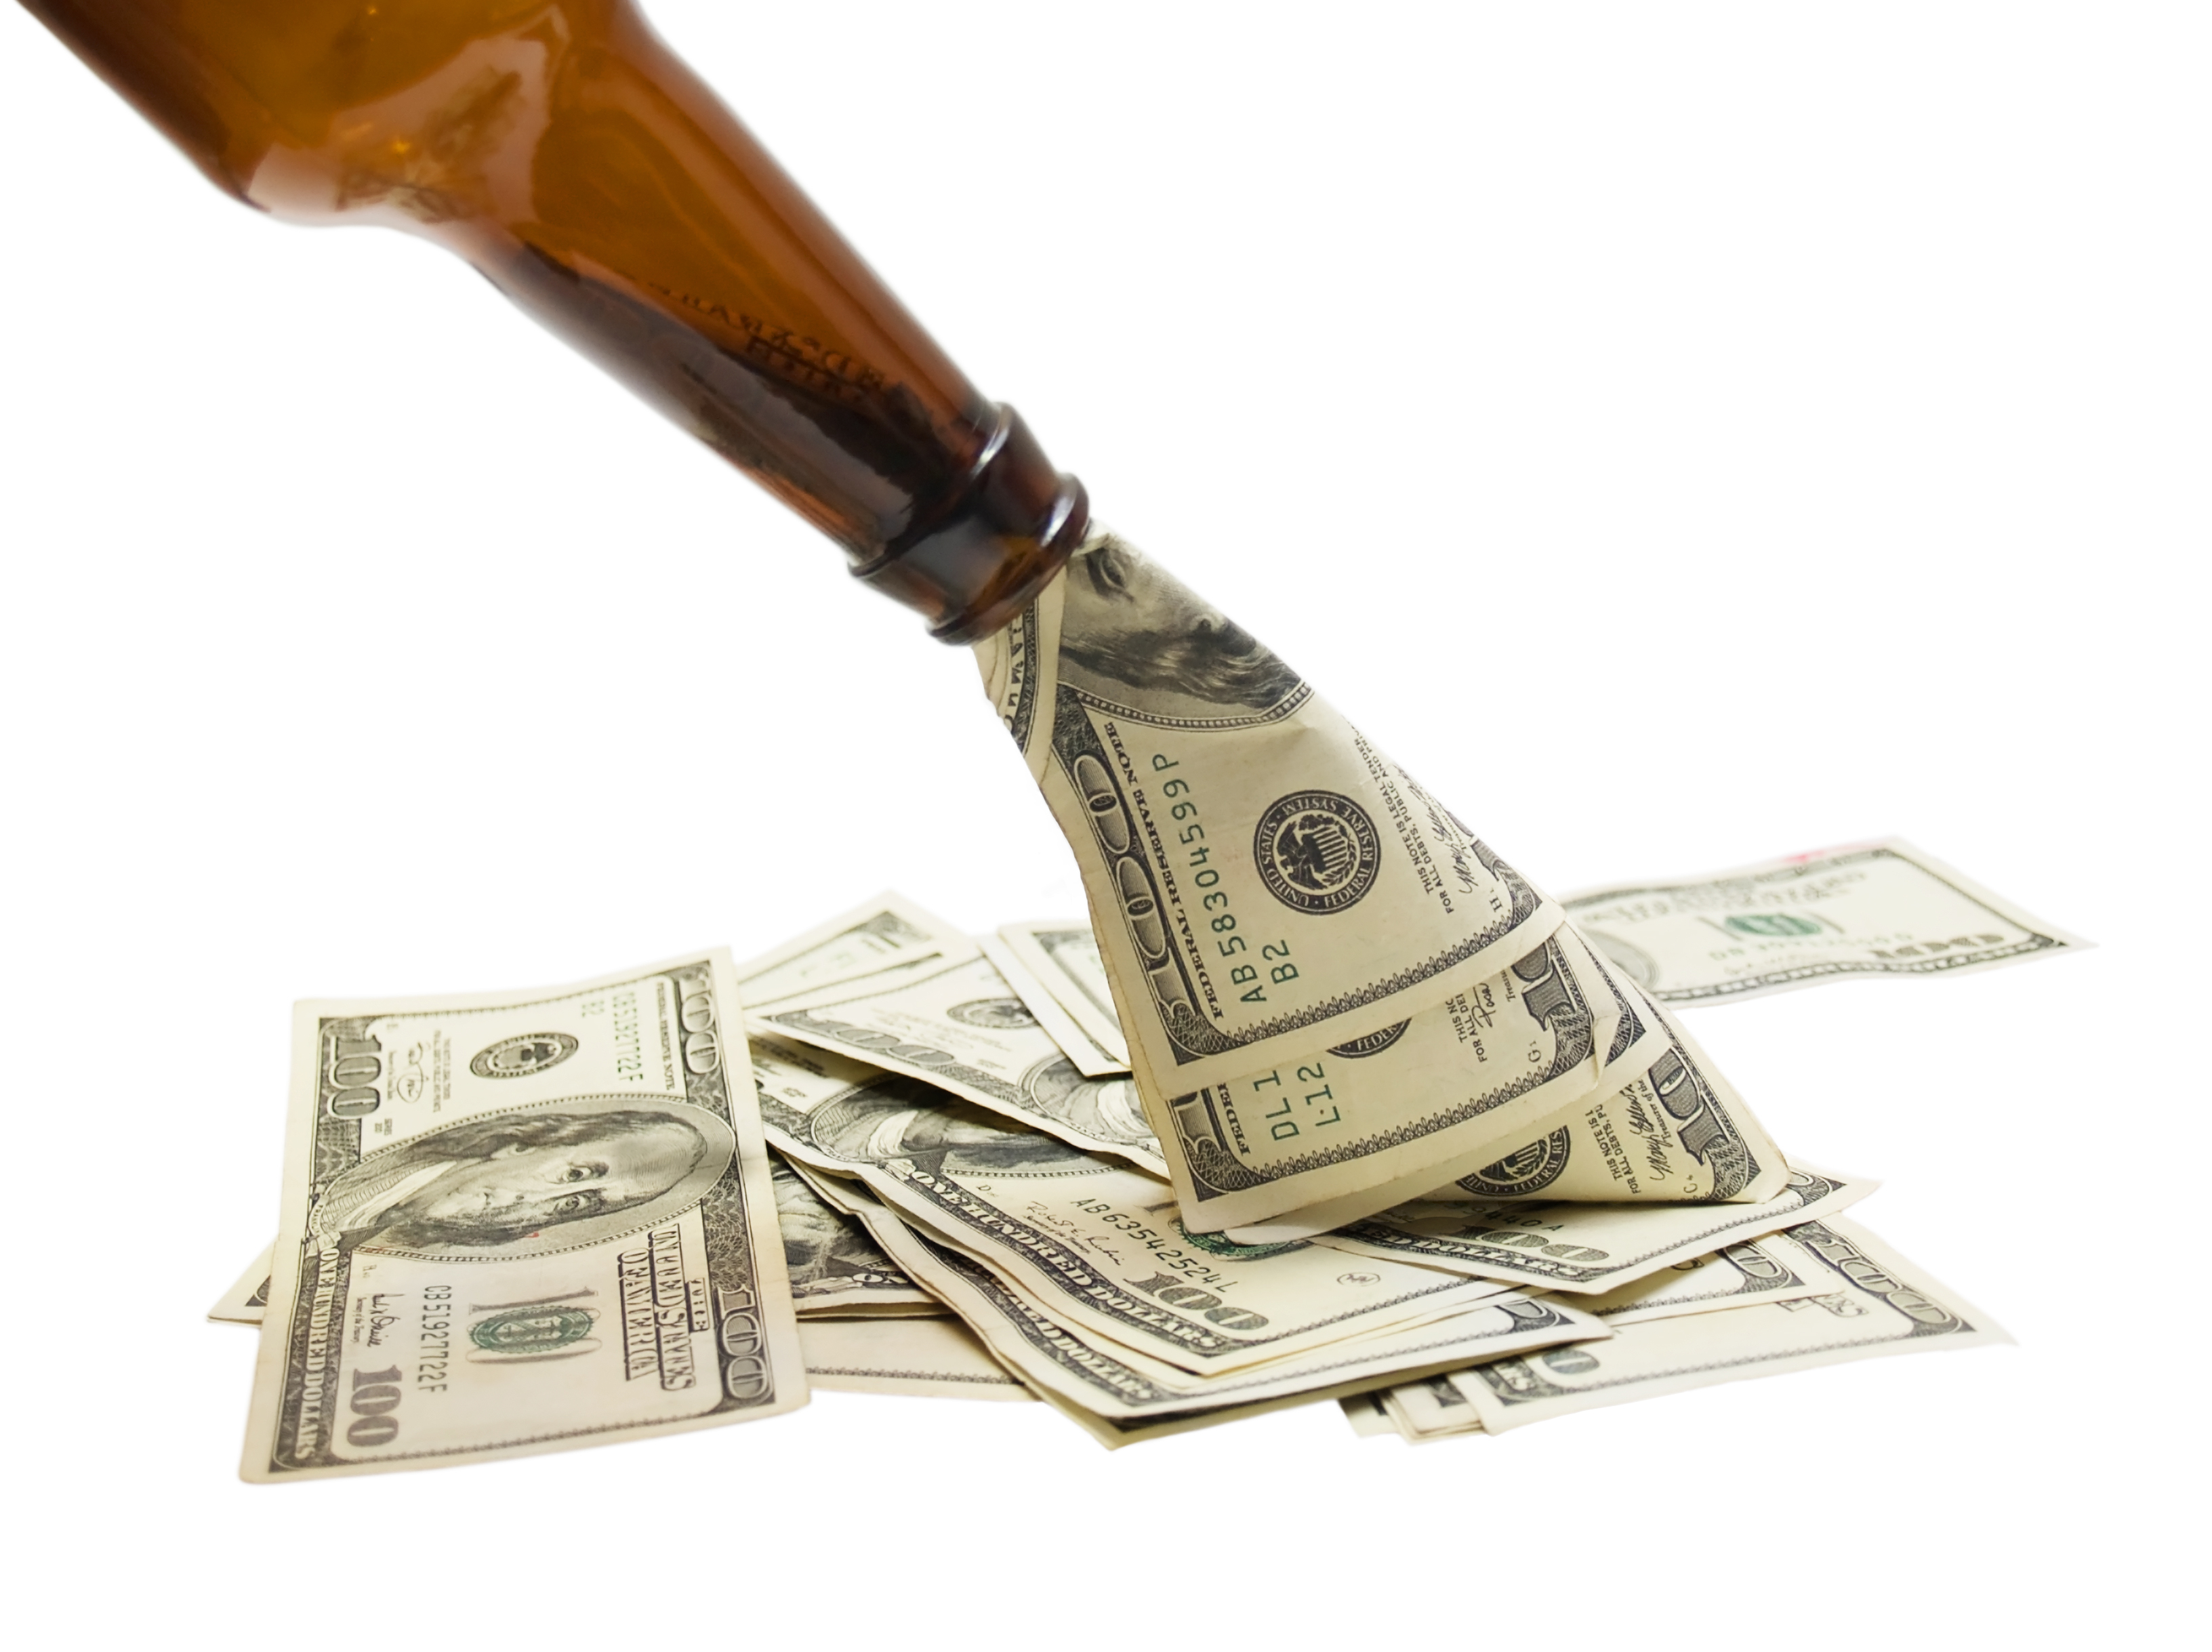 Cash being poured from a glass bottle, isolated on white.